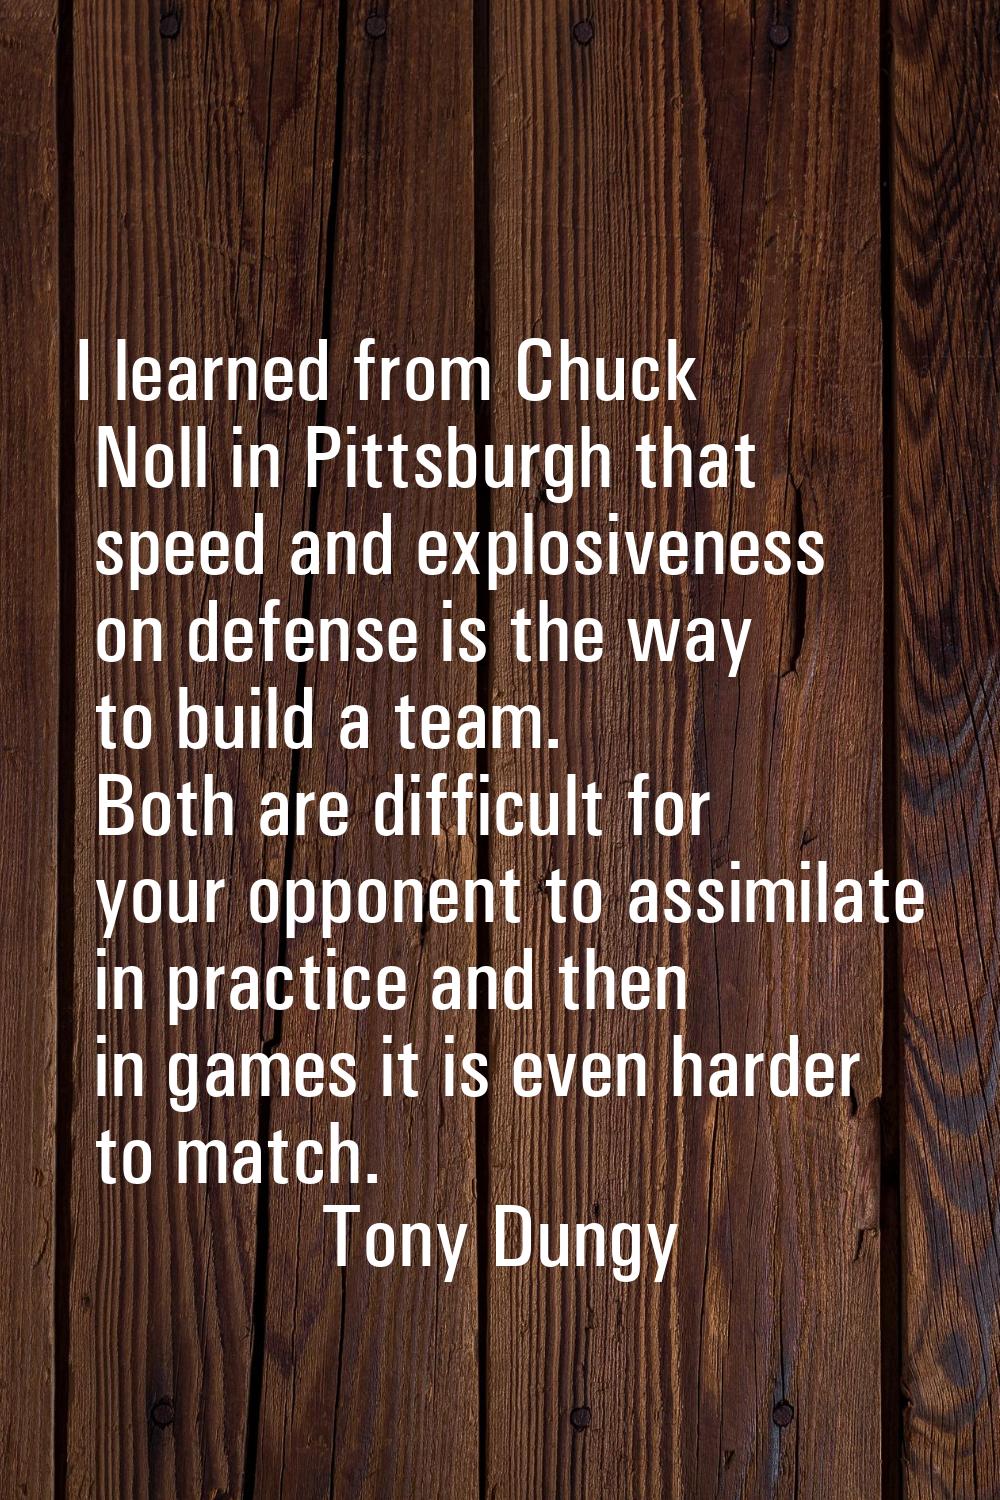 I learned from Chuck Noll in Pittsburgh that speed and explosiveness on defense is the way to build